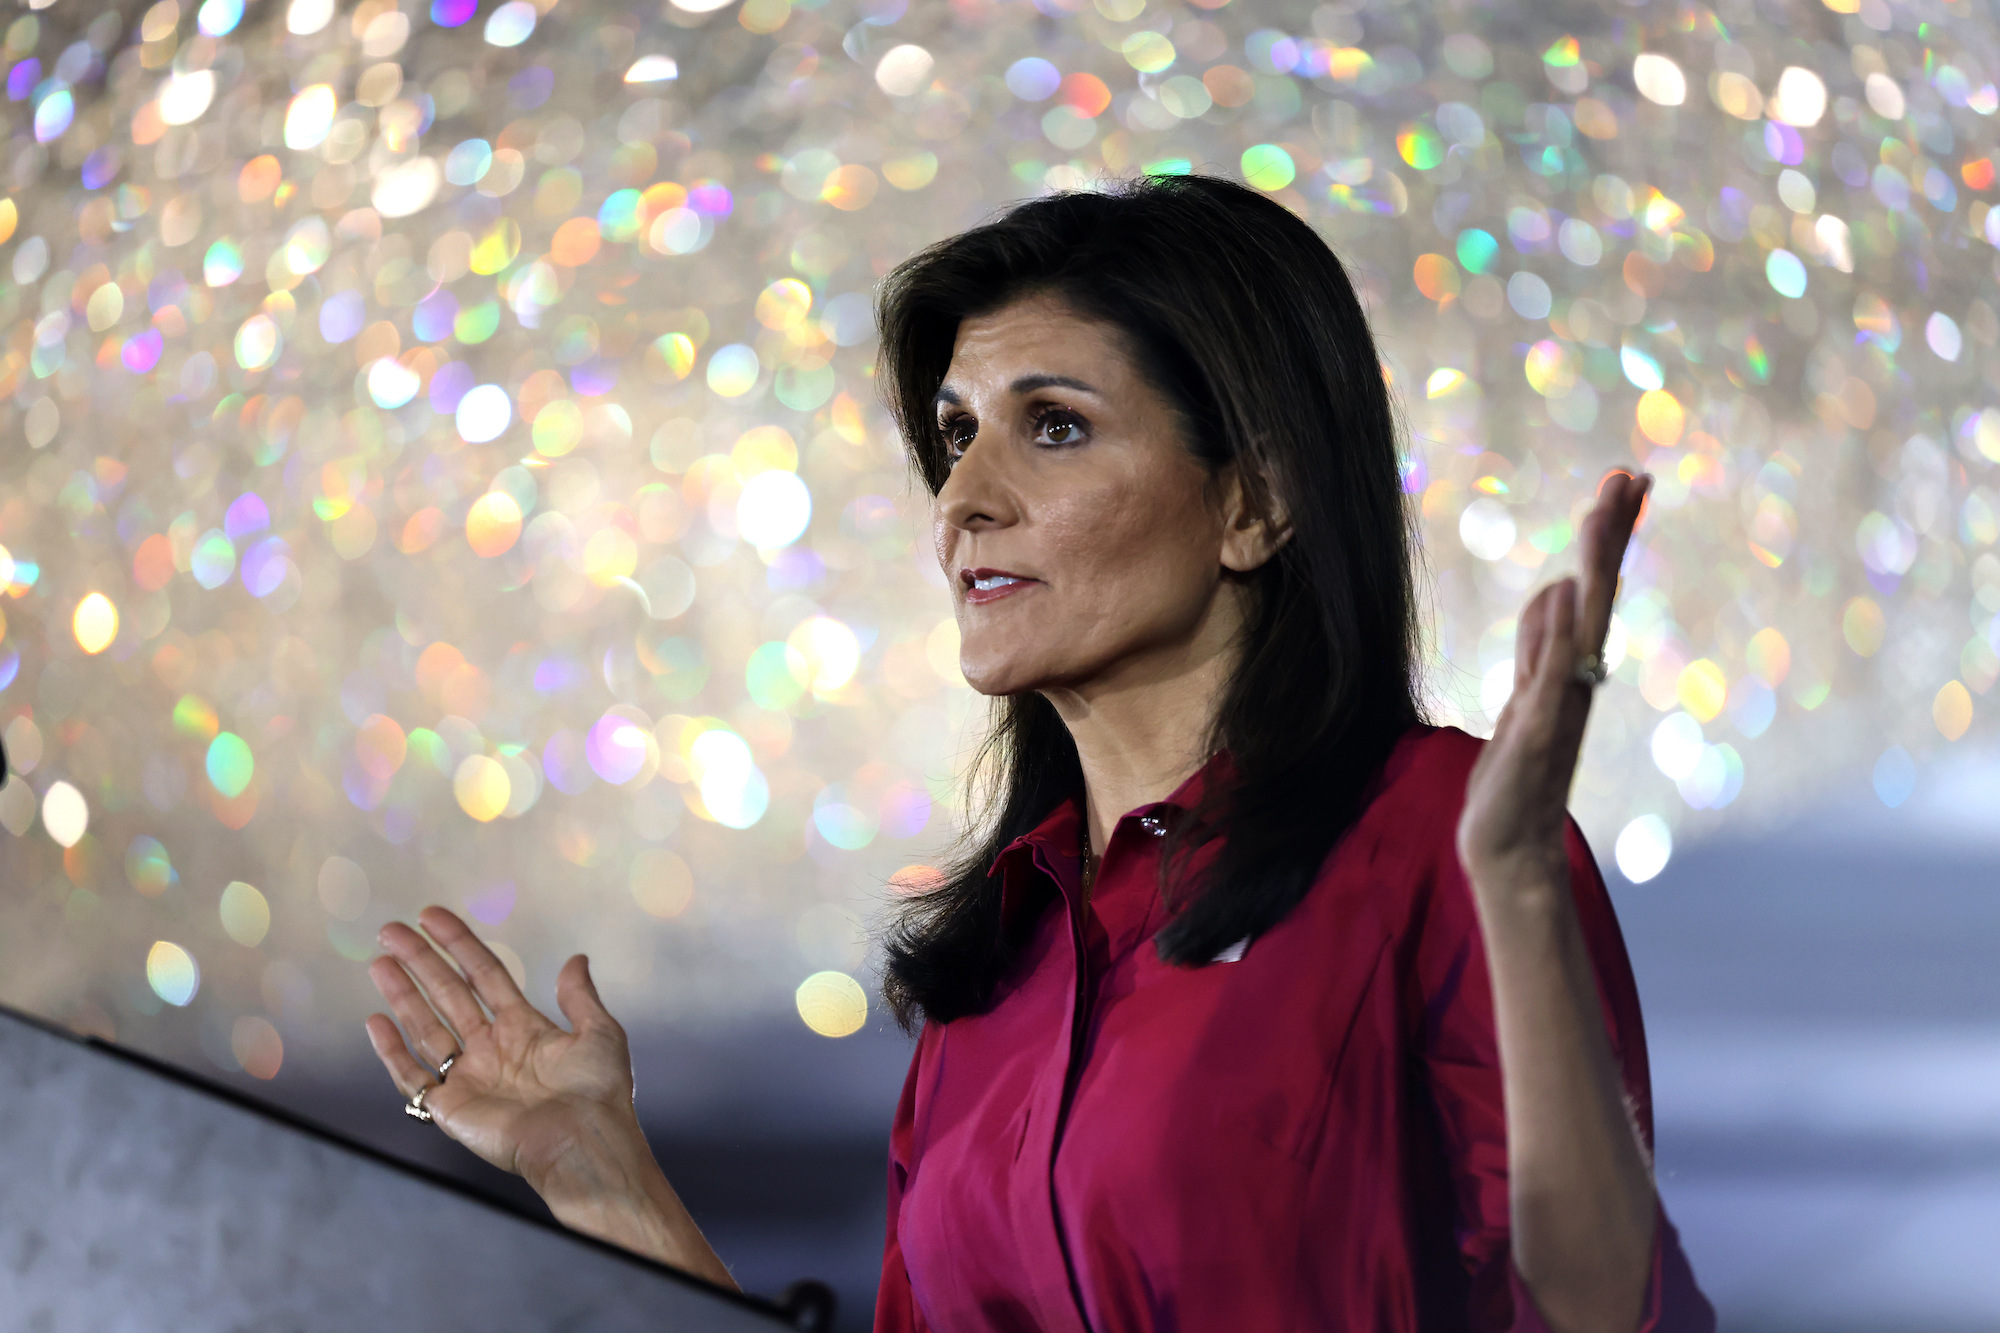 Nikki Haley speaks during a caucus night watch party in West Des Moines, Iowa, on Monday.